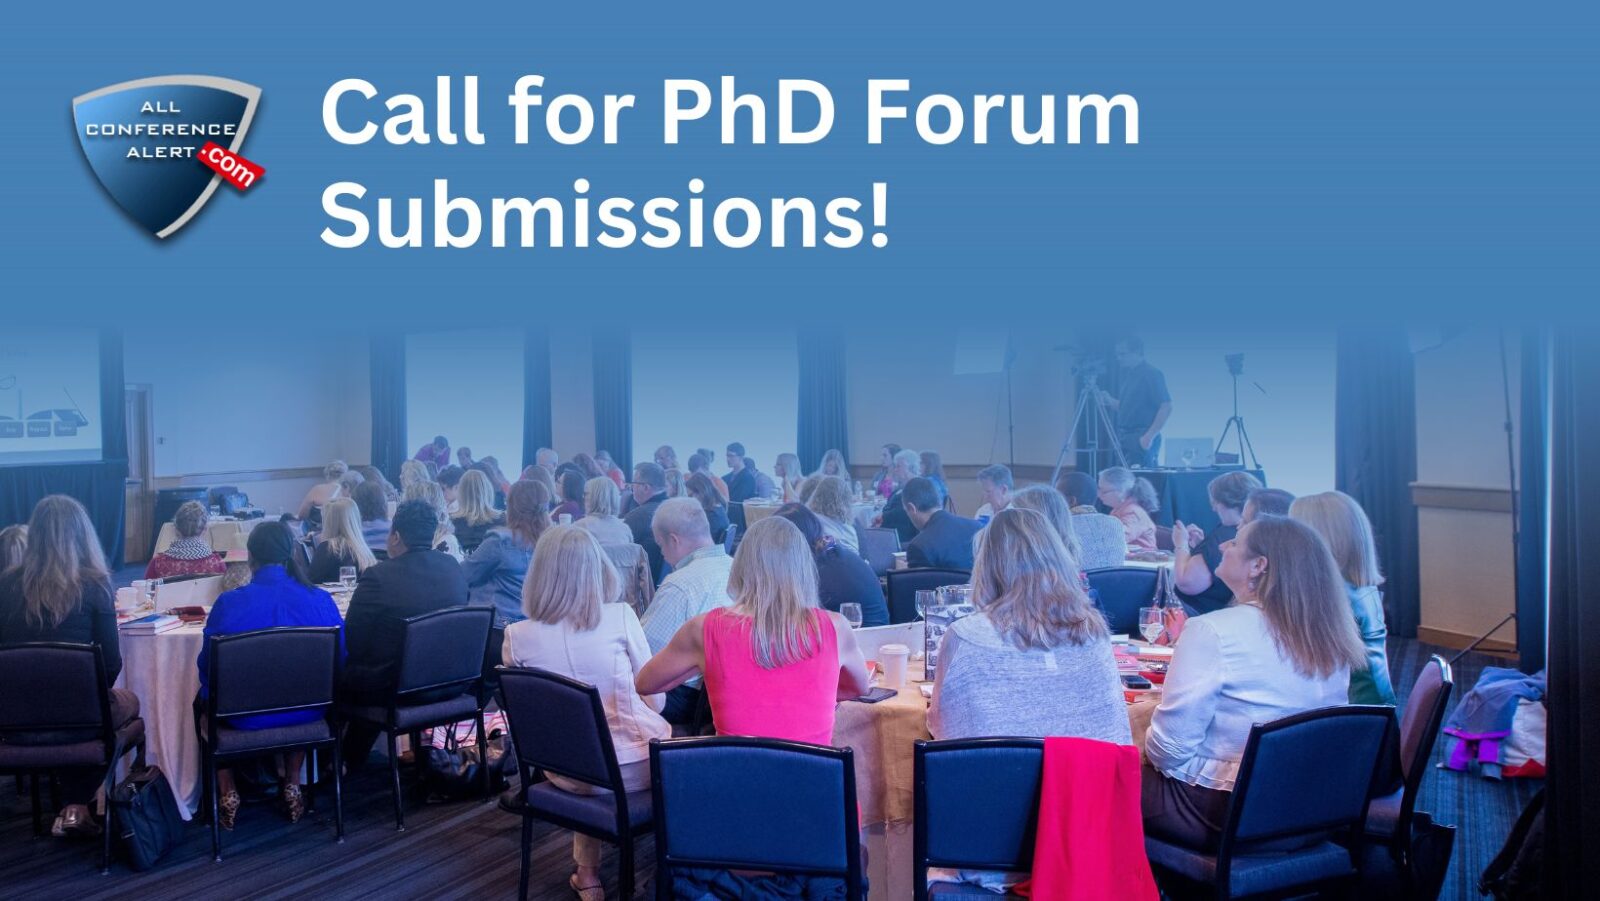 Call for PhD Forum Submissions!